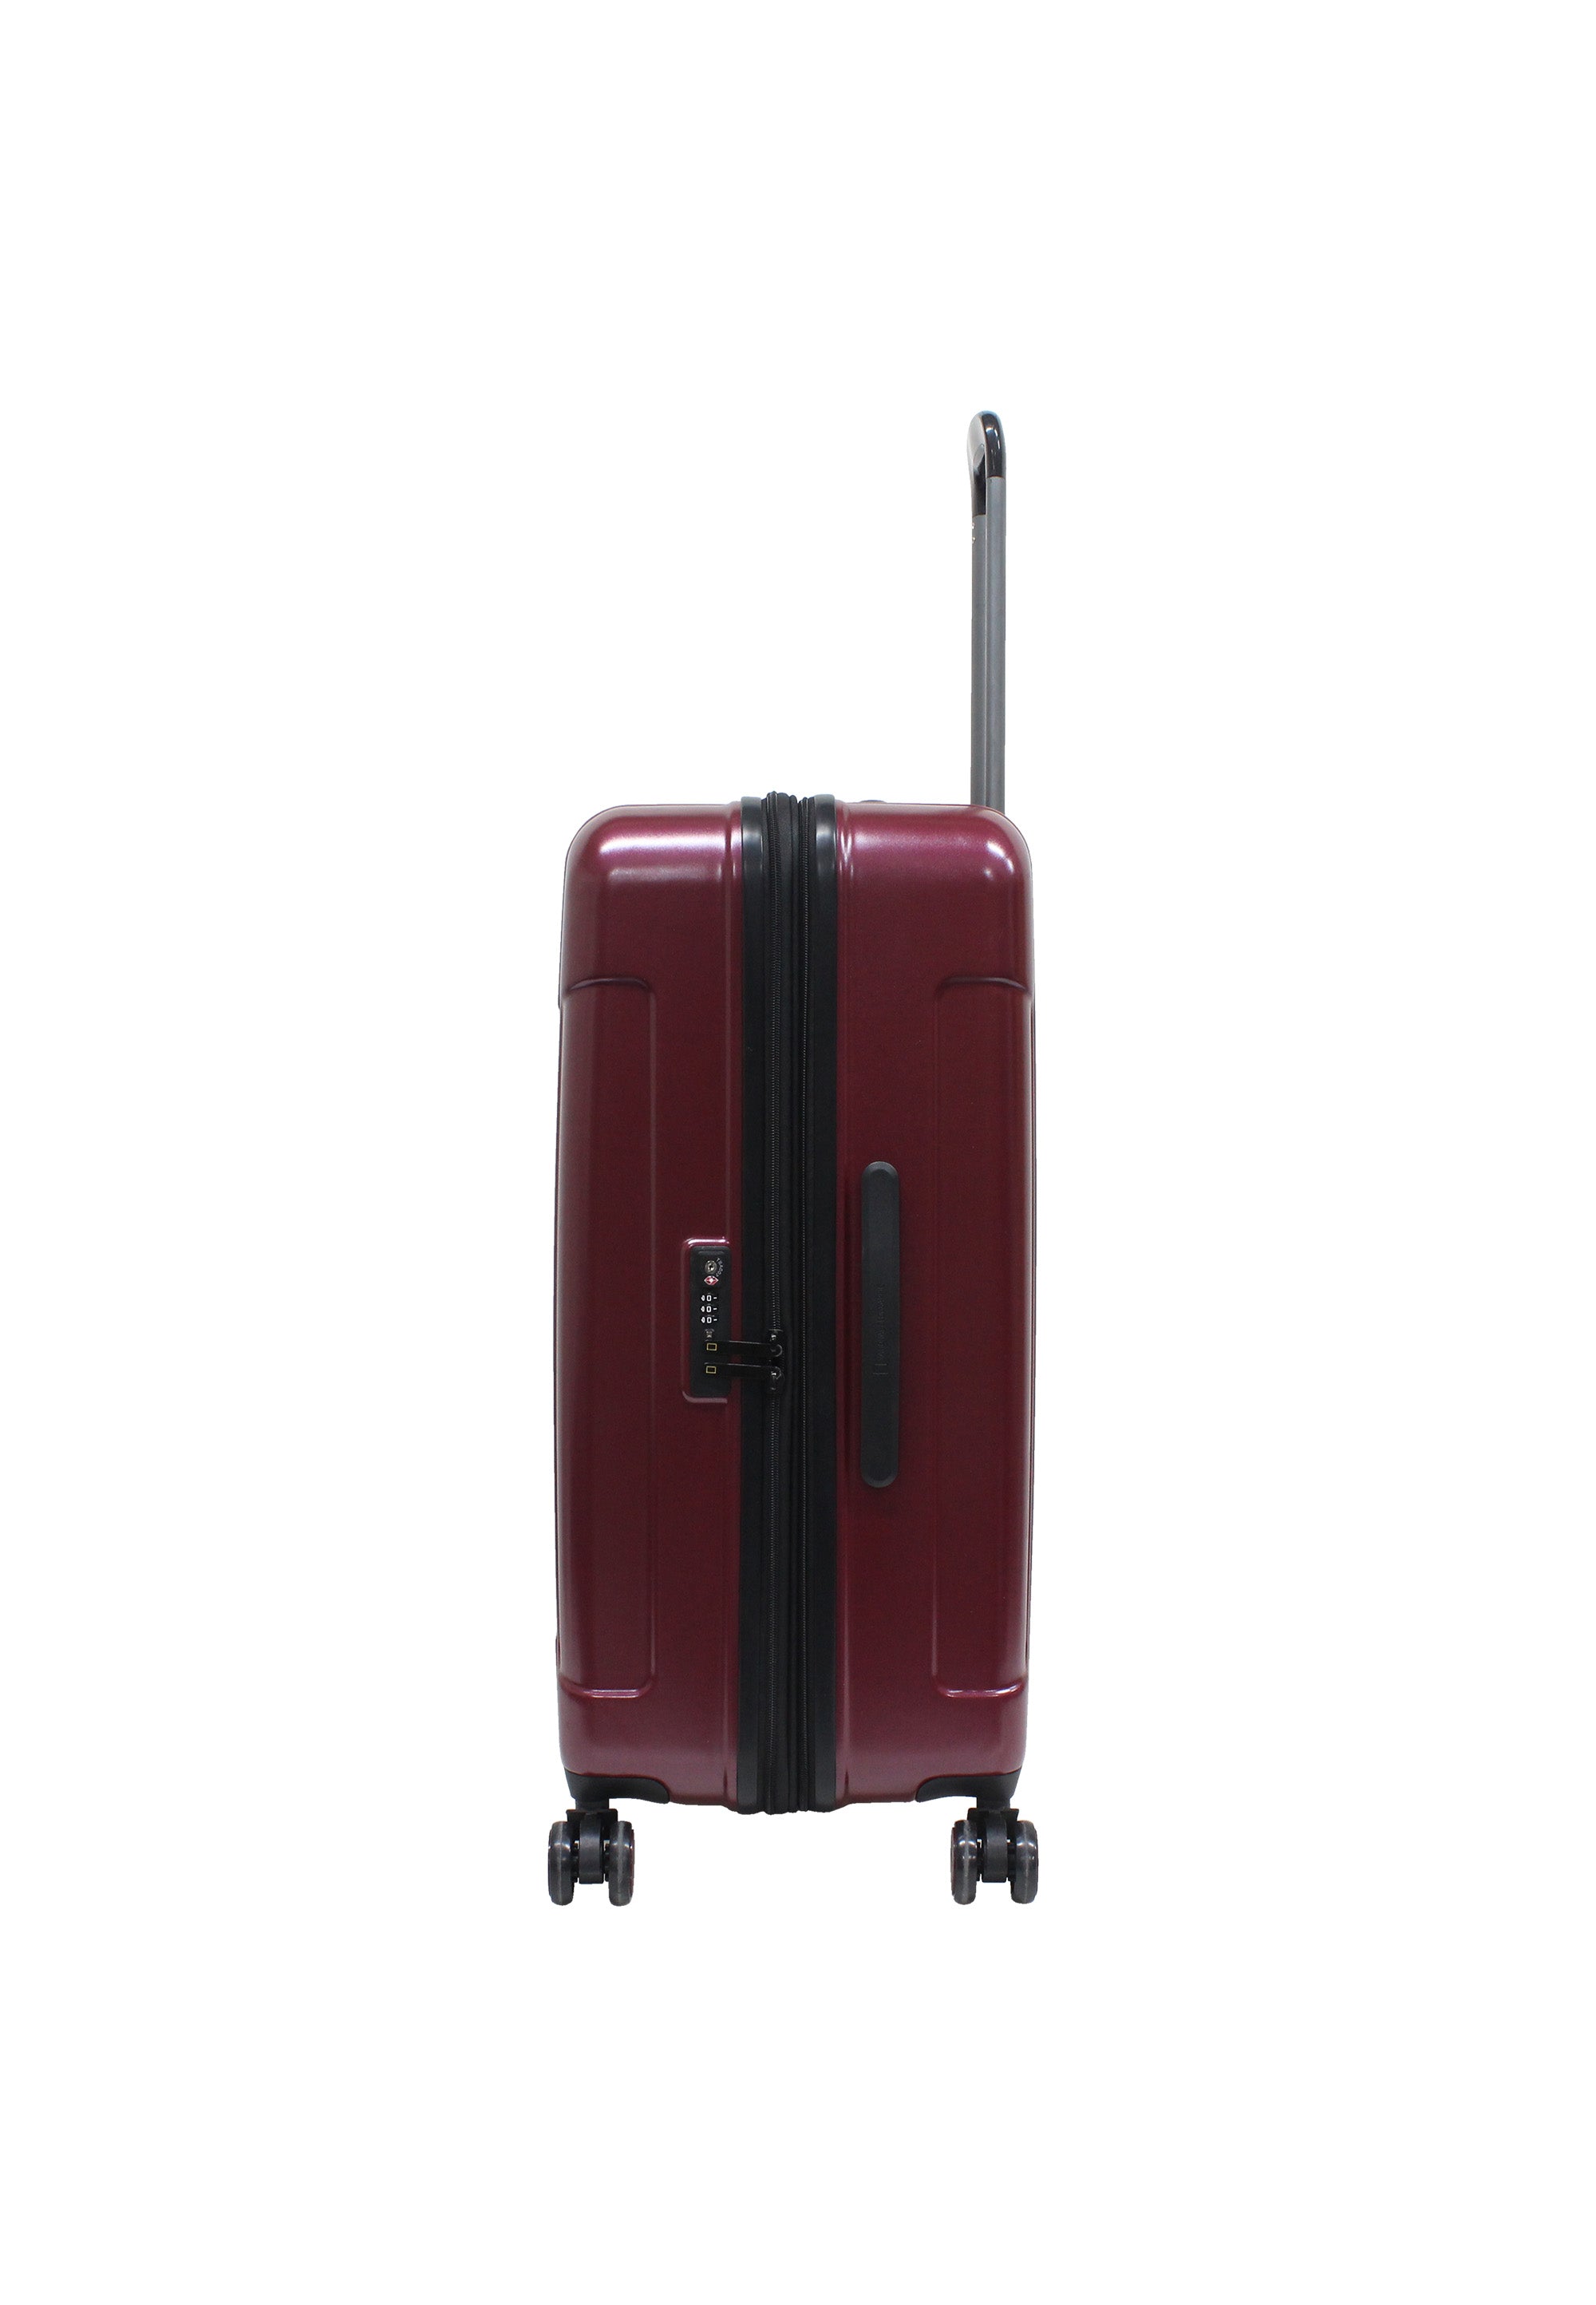 National Geographic - Canyon Hartschalenkoffer / Trolley / Reisekoffer - 77 cm - (Large) - Rot